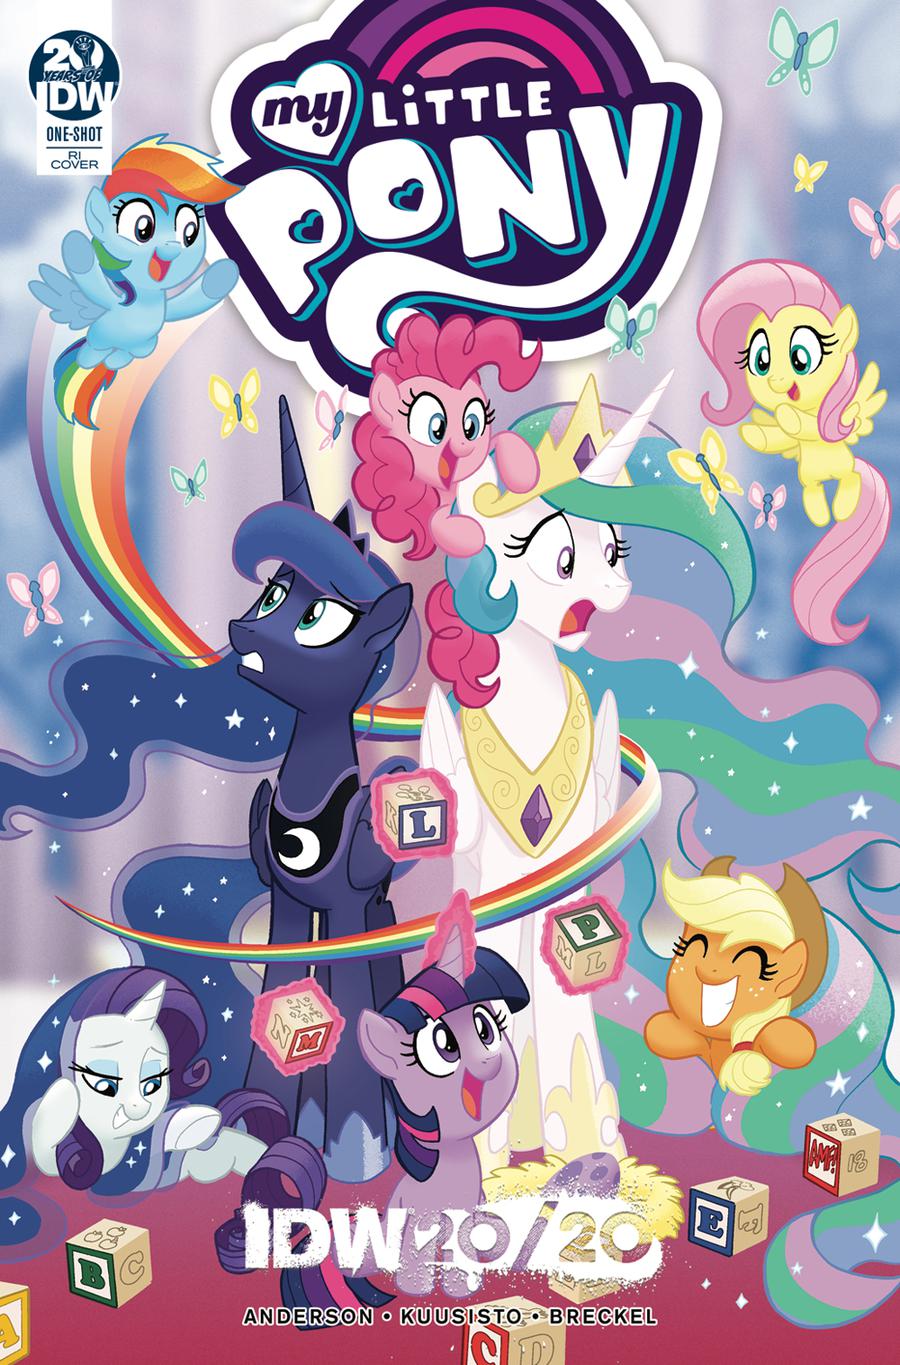 My Little Pony IDW 20/20 Cover B Incentive Tony Fleecs Variant Cover